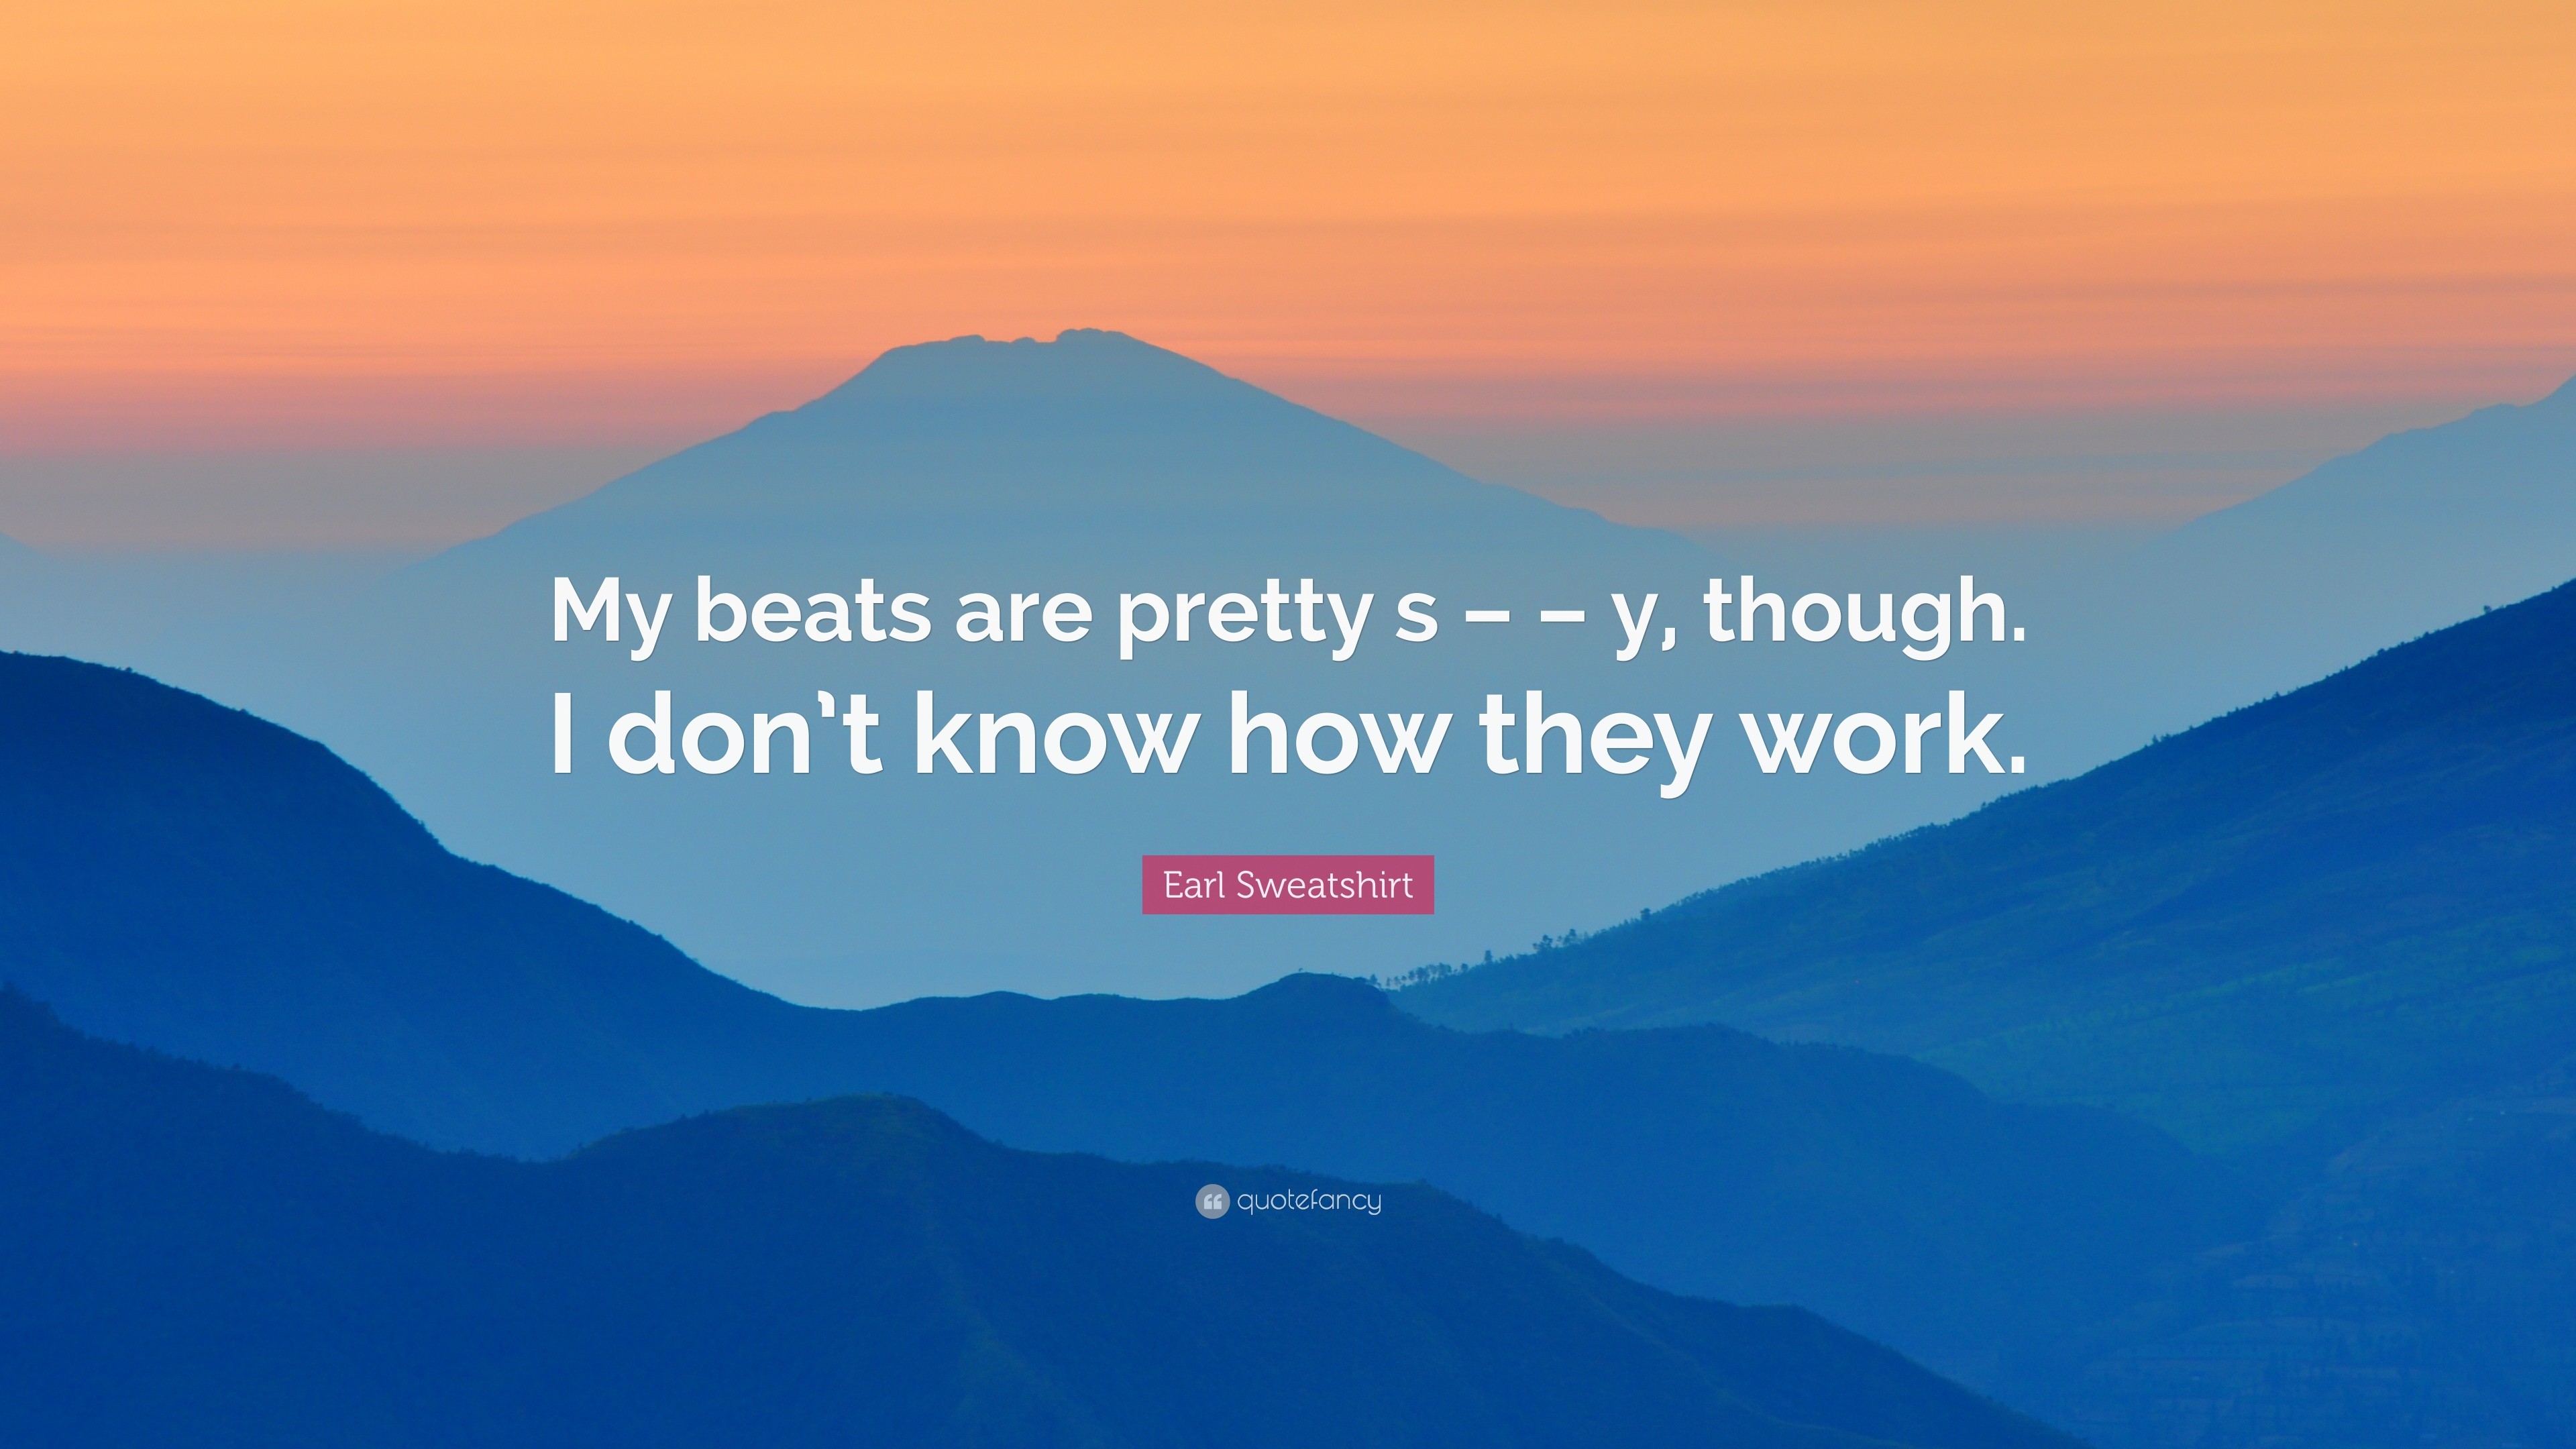 Earl Sweatshirt Quote My beats are pretty s y, though